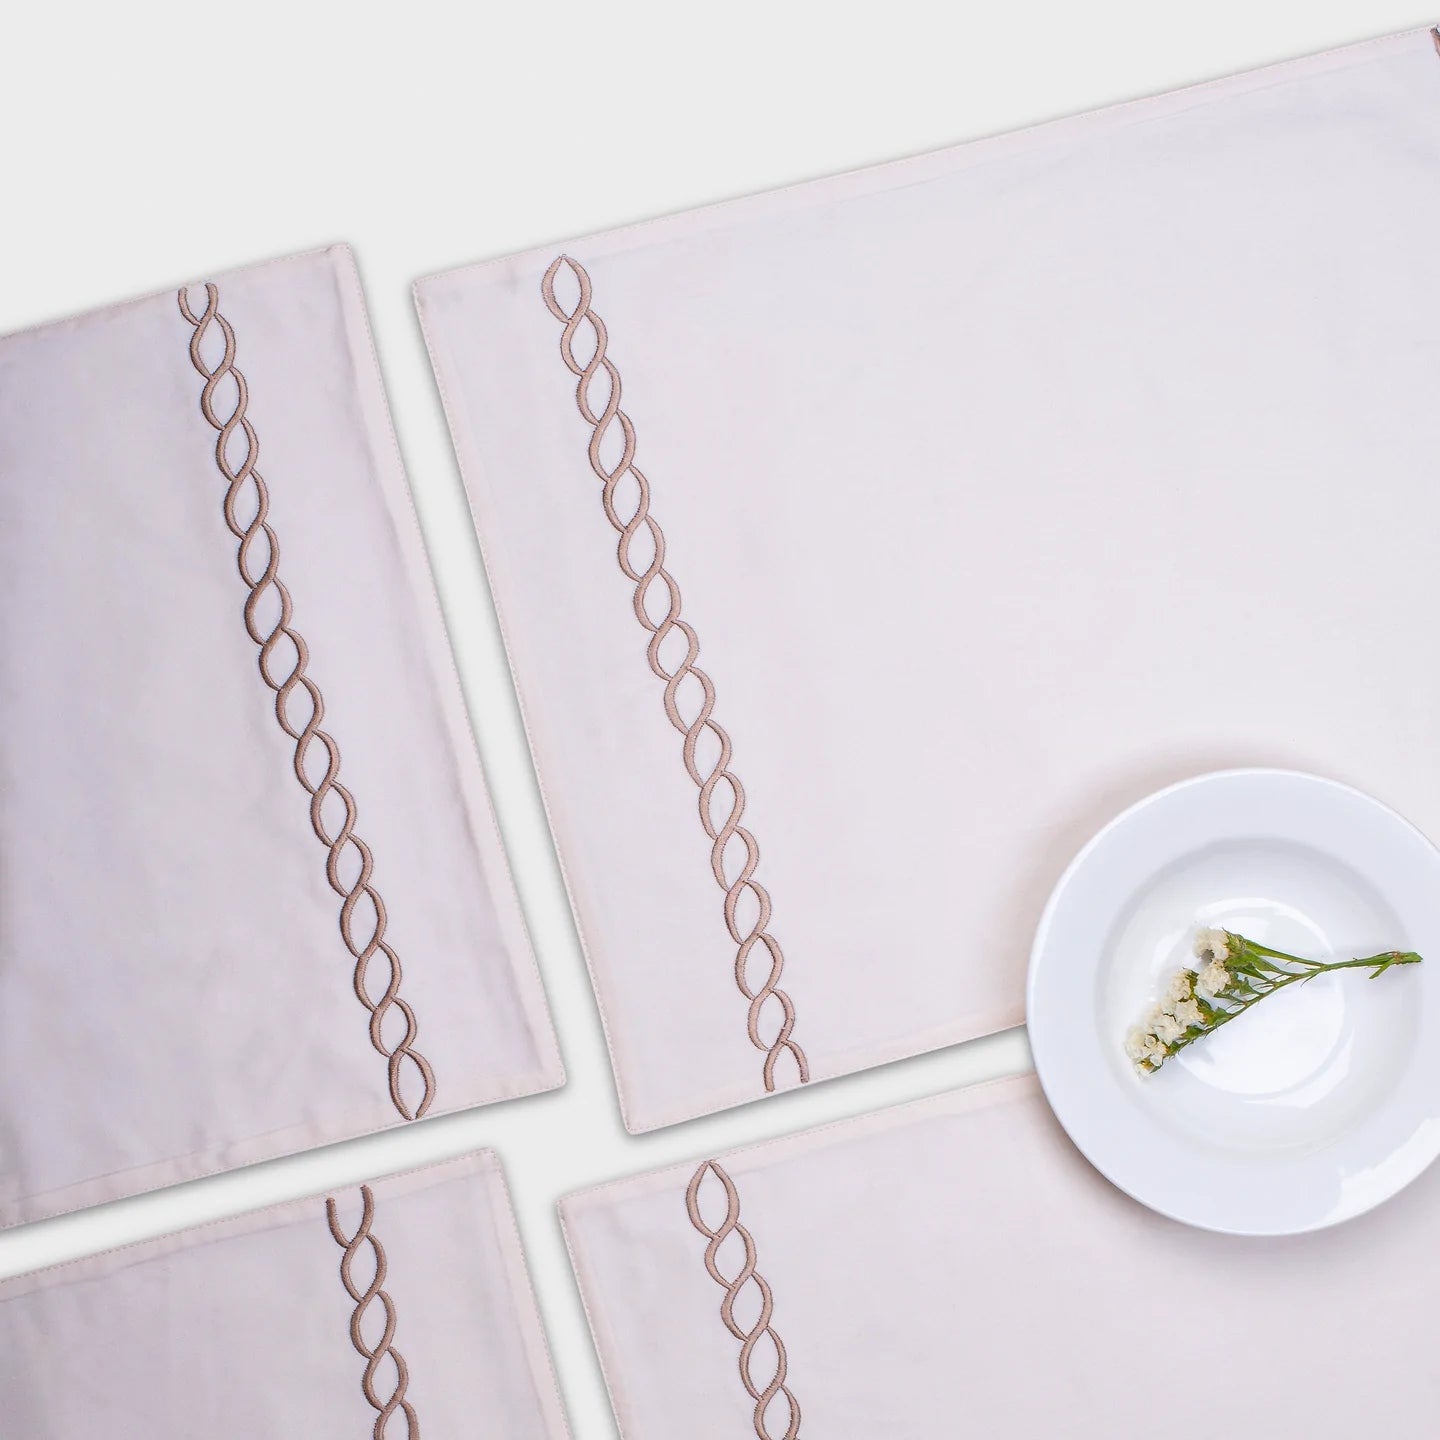 Petals Cream Placemats (Set of 4) by Veda Homes - Home Artisan